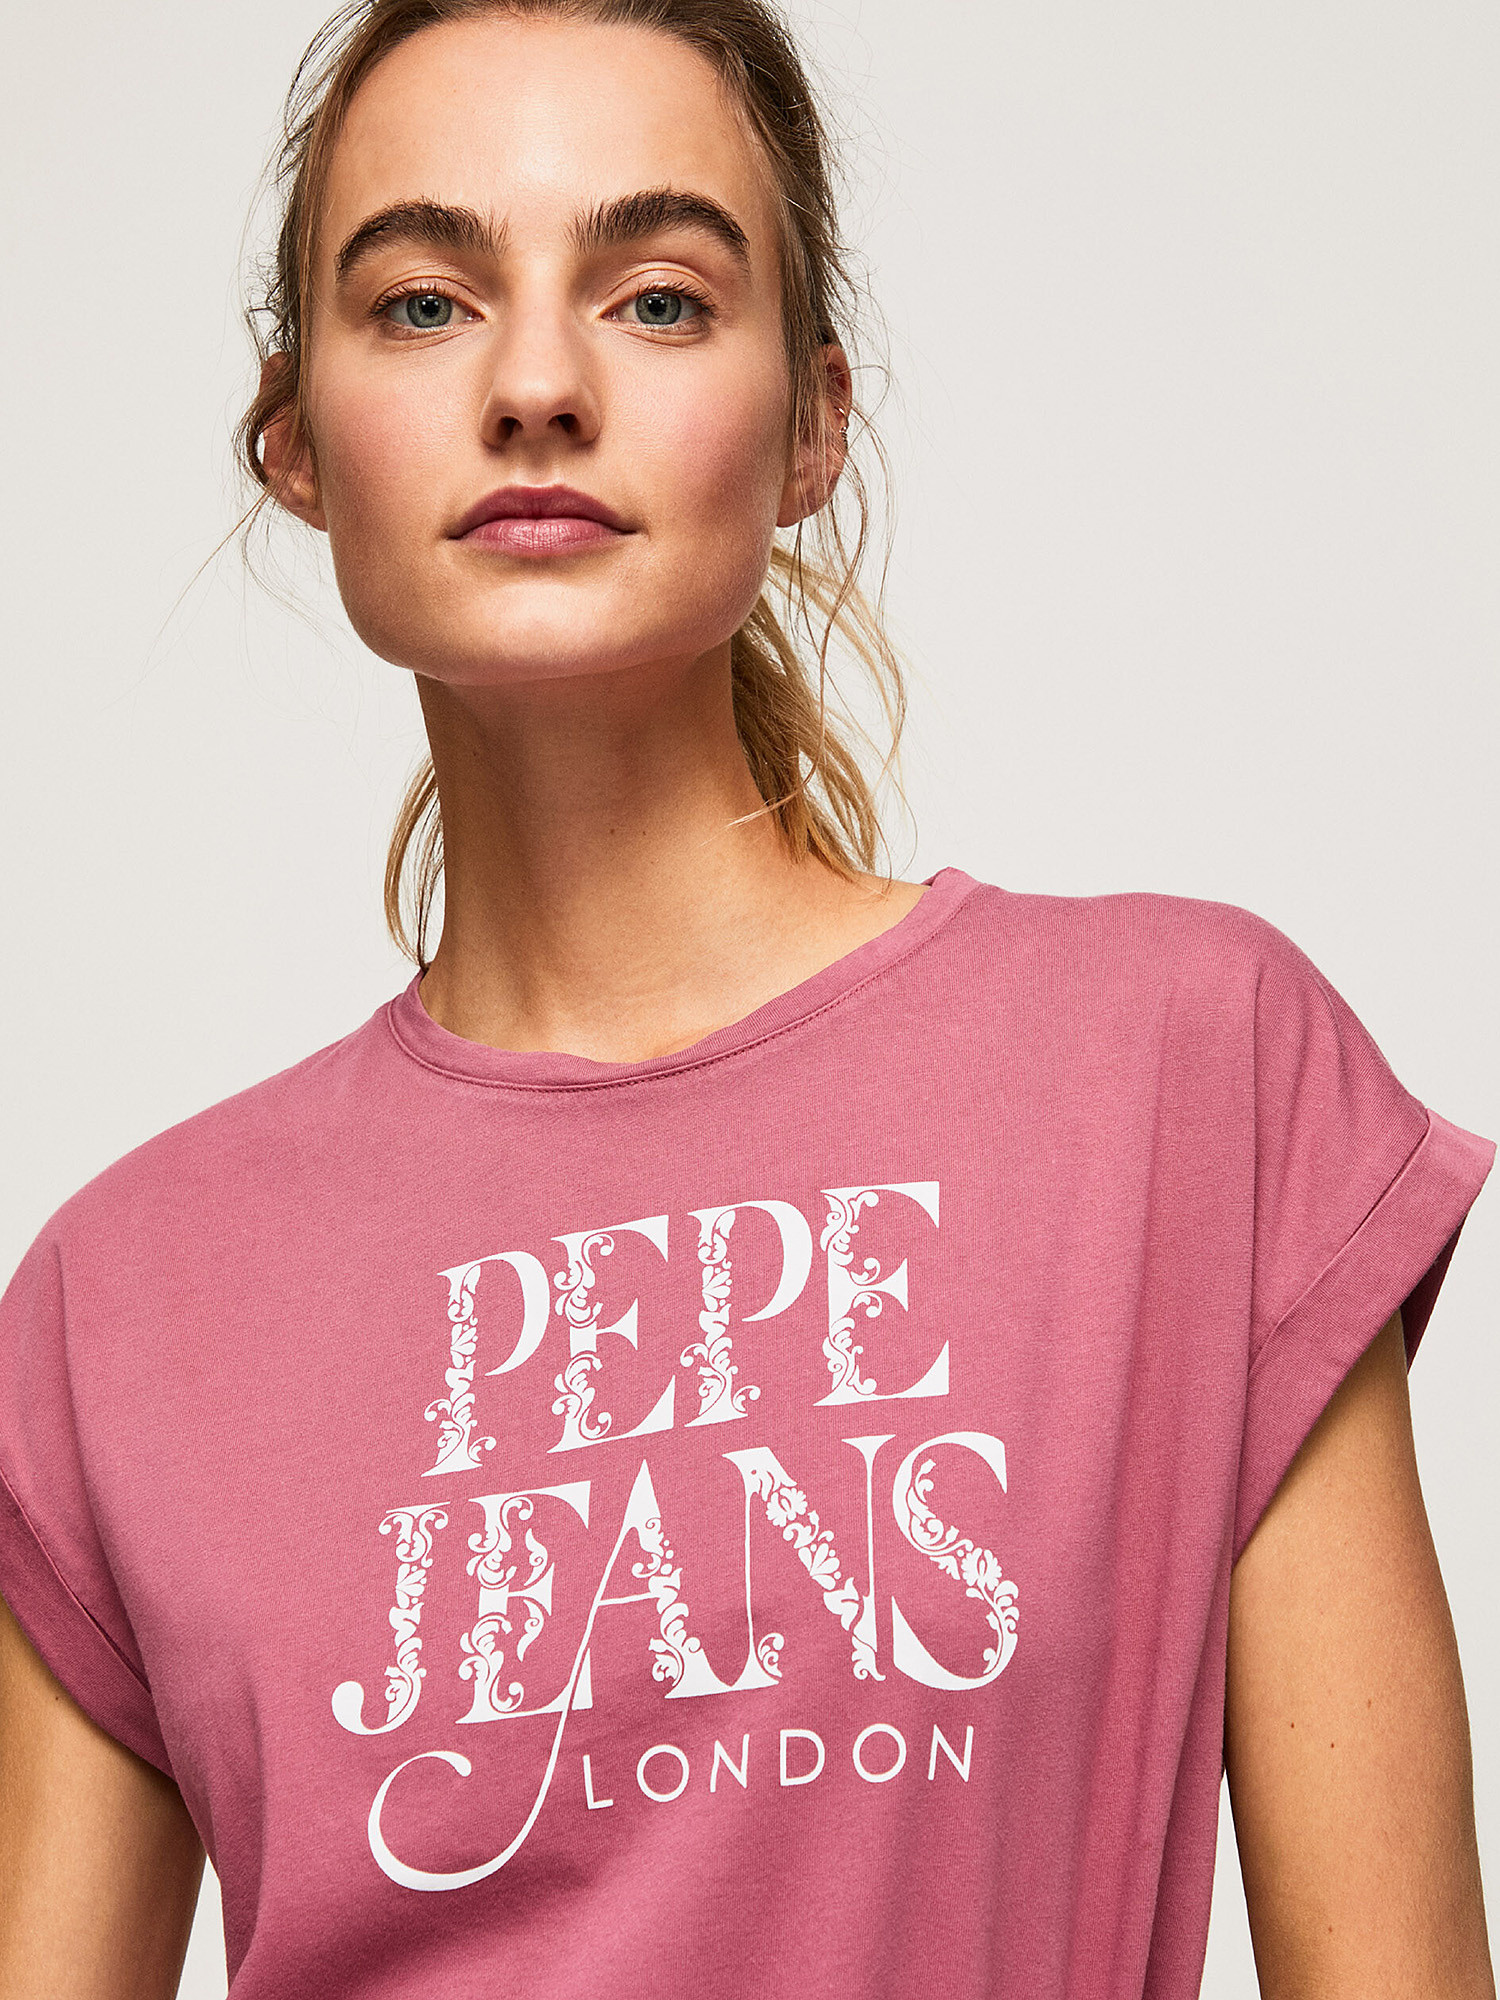 Pepe Jeans - T-shirt con logo in cotone, Rosa scuro, large image number 5